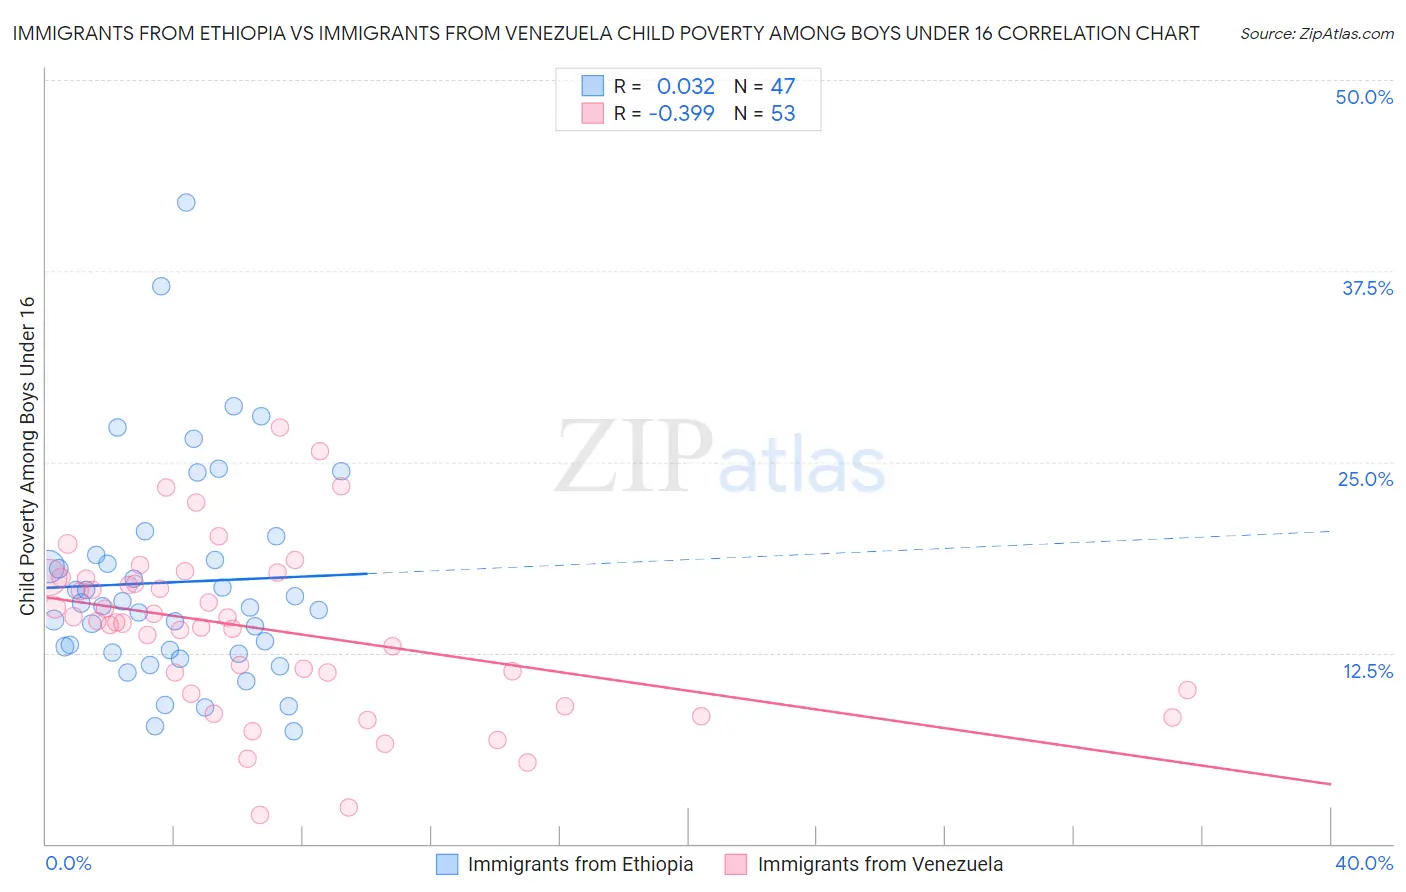 Immigrants from Ethiopia vs Immigrants from Venezuela Child Poverty Among Boys Under 16